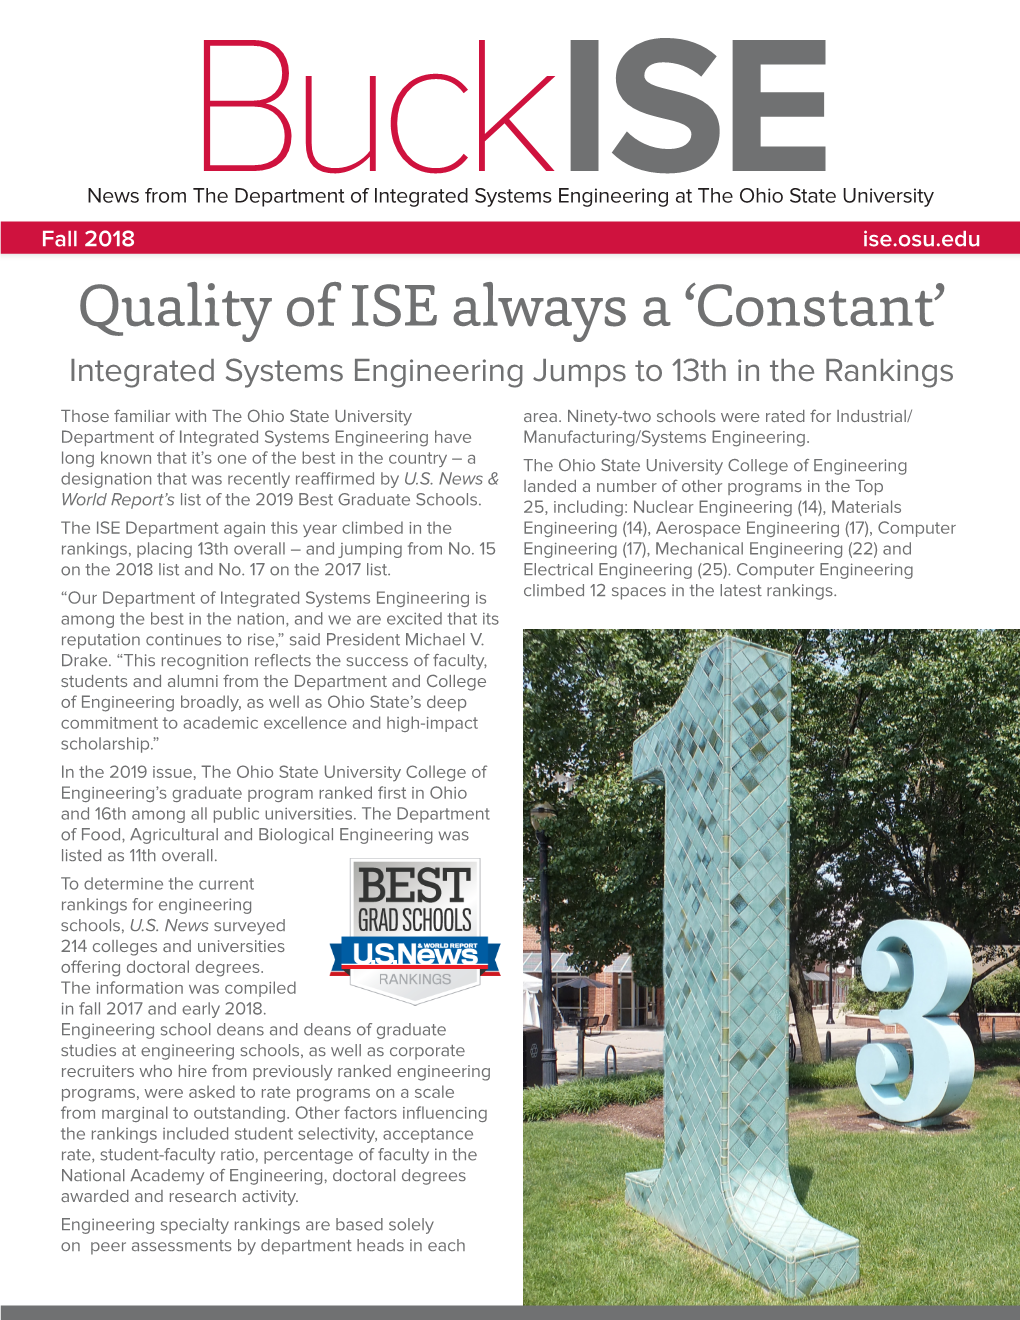 Quality of ISE Always a ‘Constant’ Integrated Systems Engineering Jumps to 13Th in the Rankings